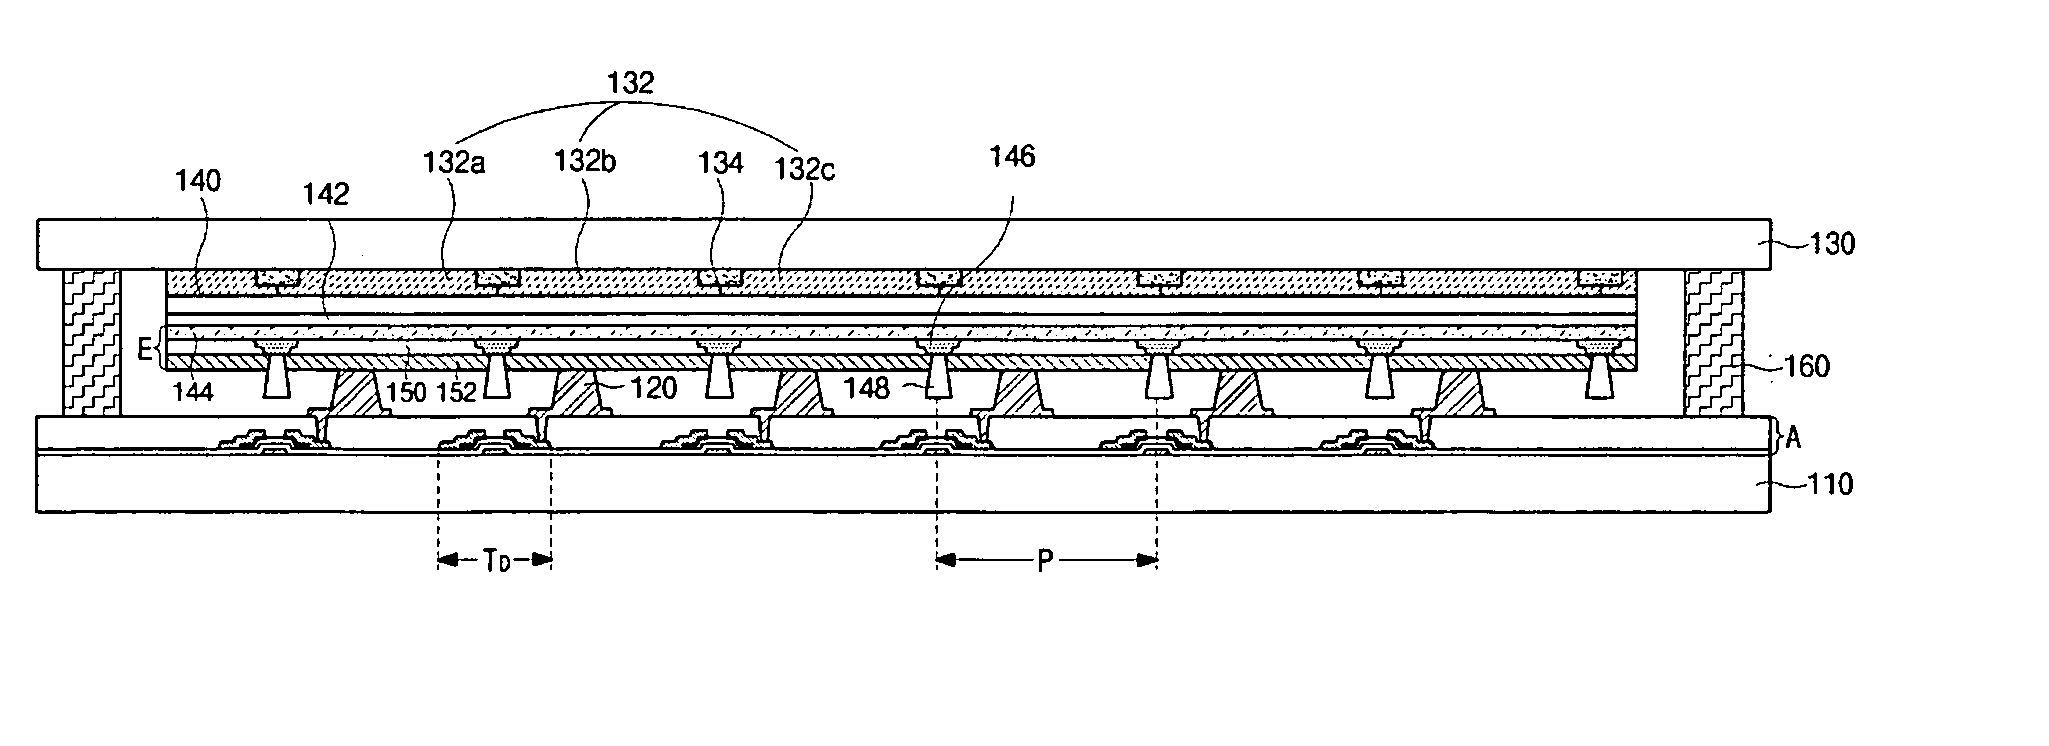 Organic electroluminescent device and method of fabricating the same